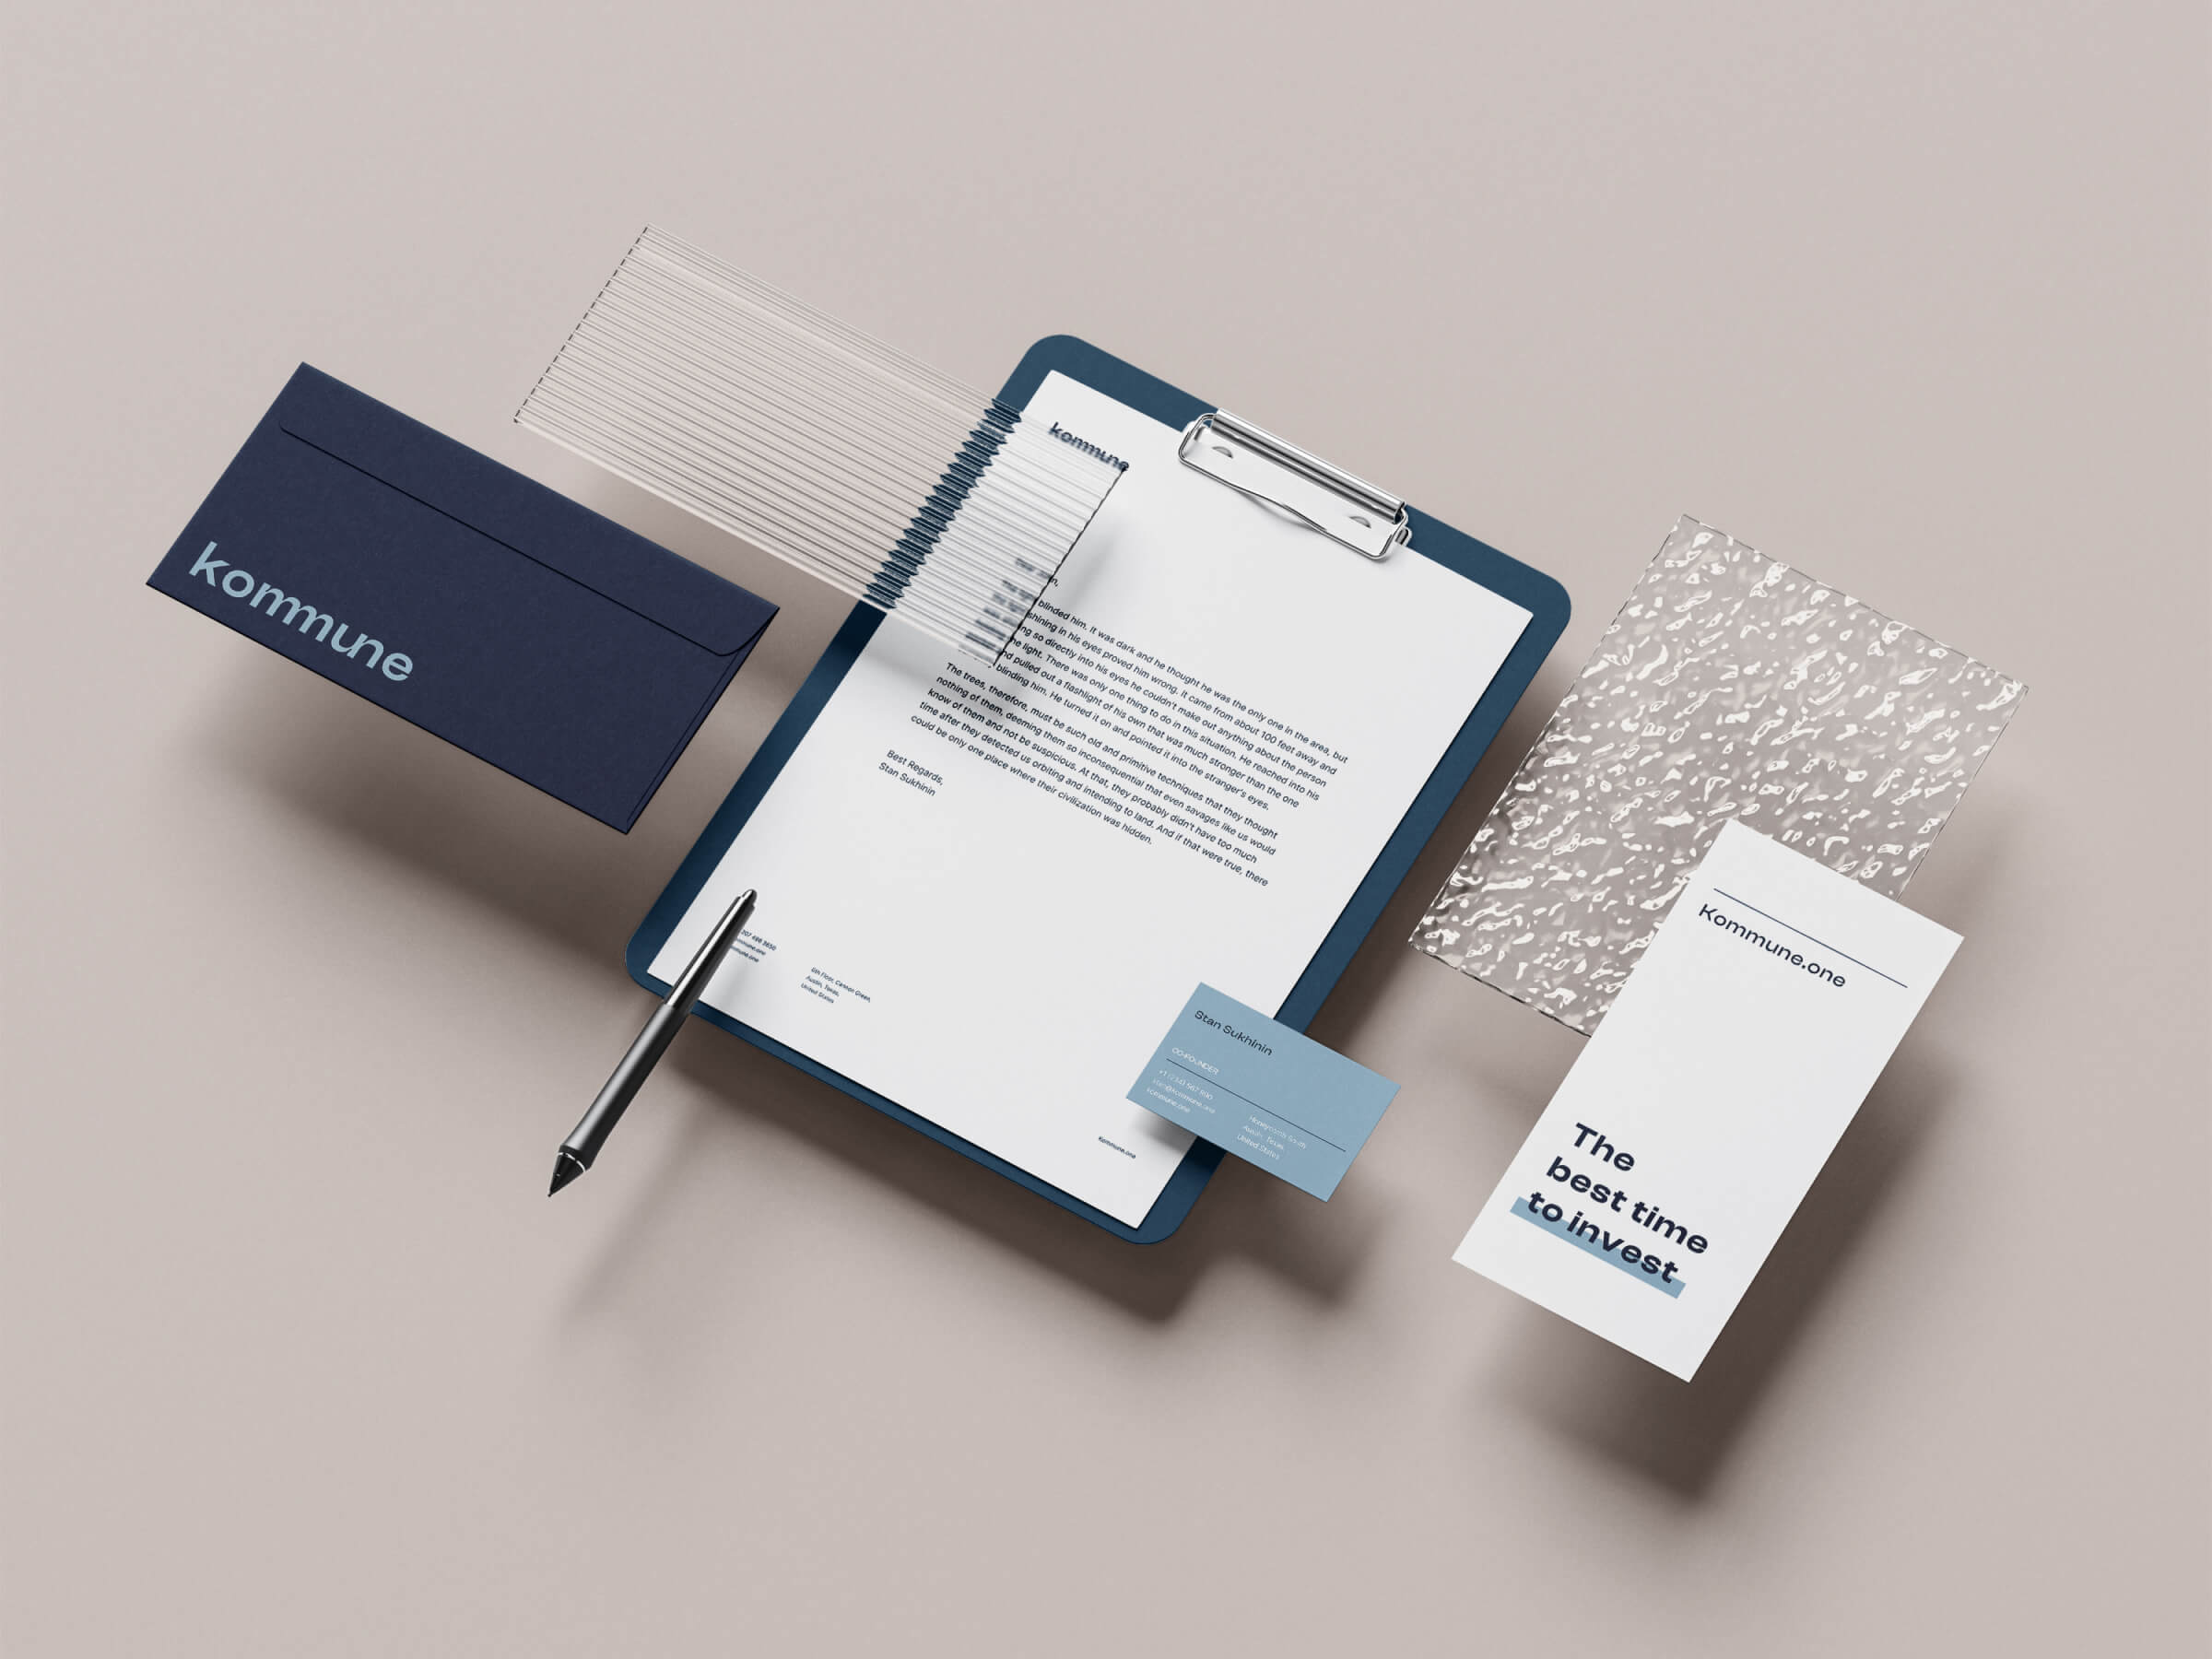 Graphic Design Agency services for Kommune